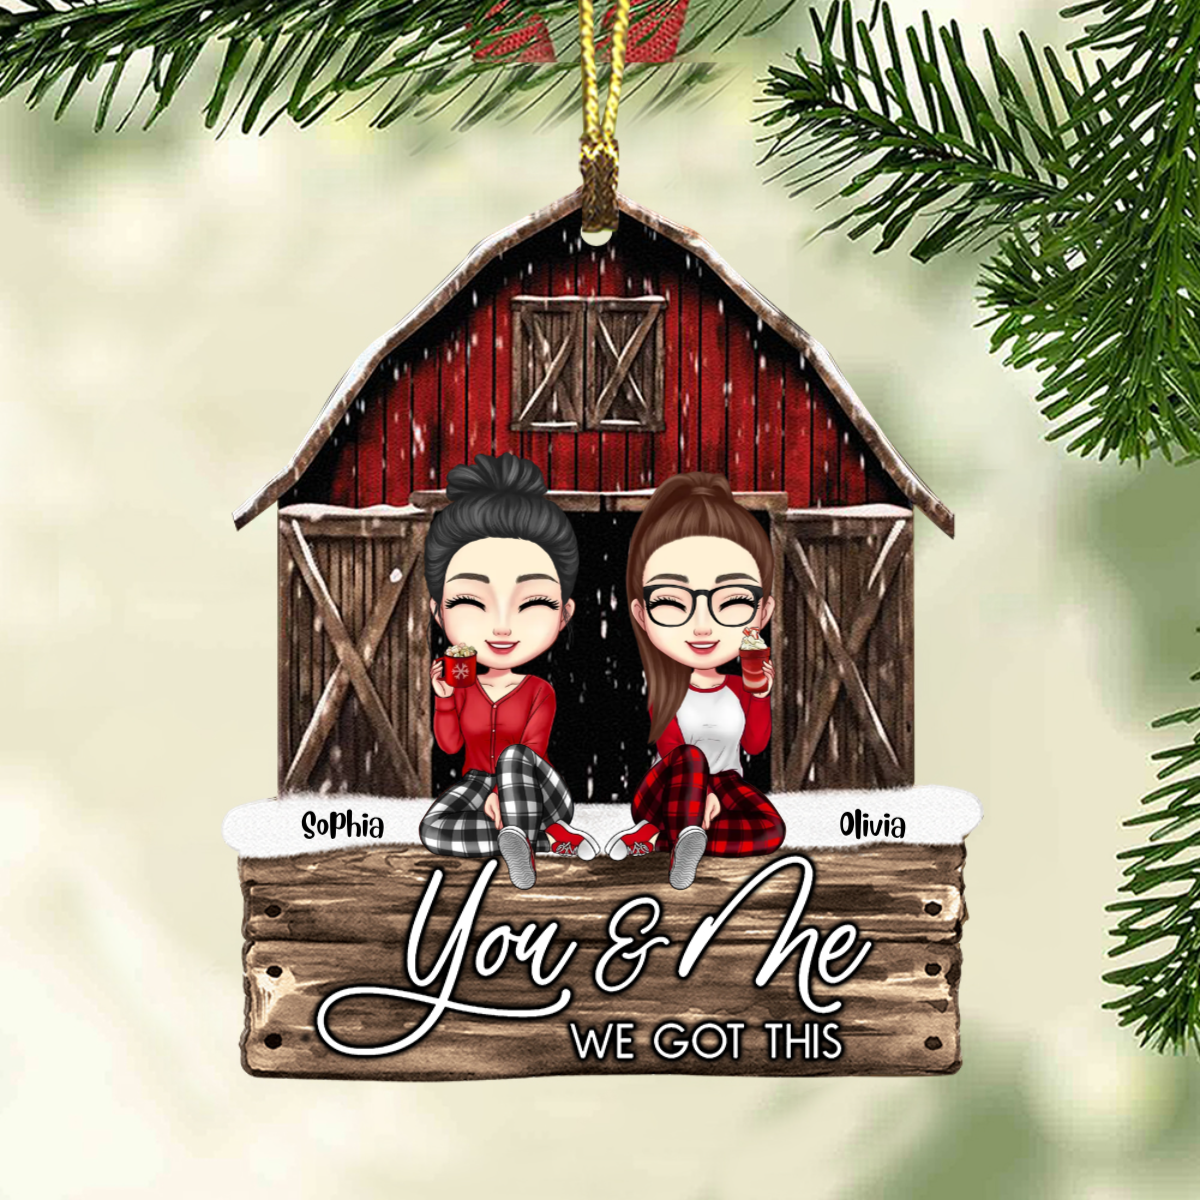 You & Me We Got This, Custom Appearances And Names - Personalized Custom Shaped Wooden Ornament - Gift For Besties, Christmas Gift